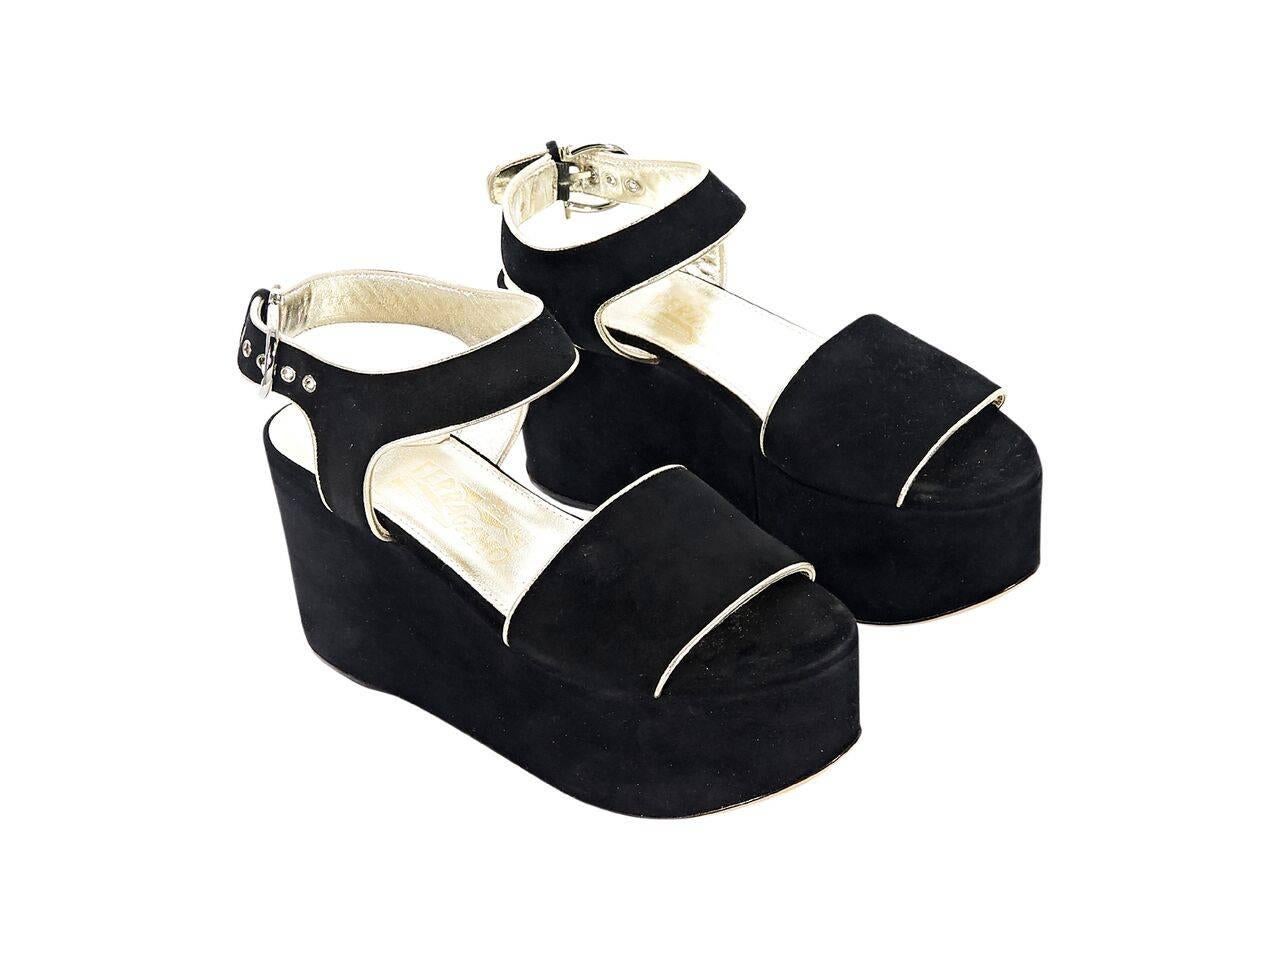 Product details:  Black suede wedge sandals by Salvatore Ferragamo.  Trimmed with goldtone piping.  Adjustable ankle strap.  Open toe.  Goldtone hardware.  3.5